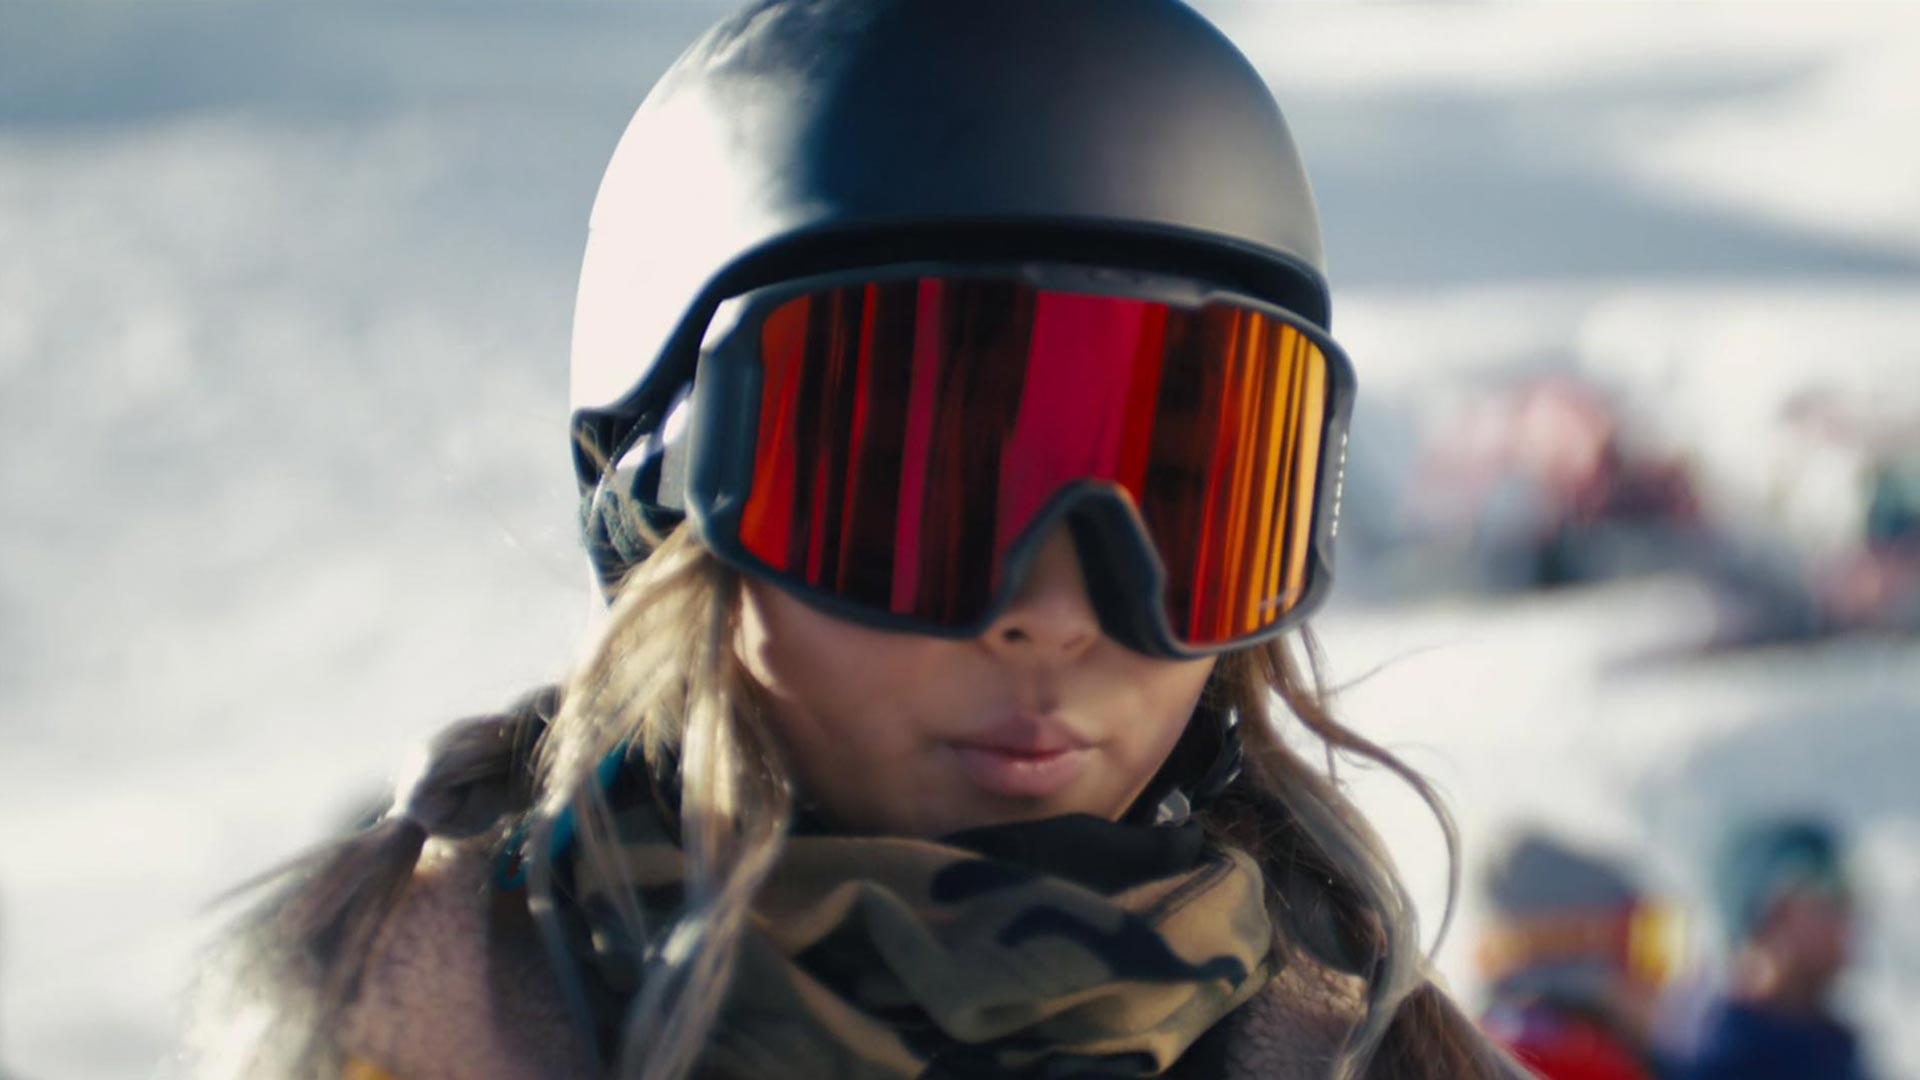 Watch Chloe Kim's Best of US Super Bowl commercial